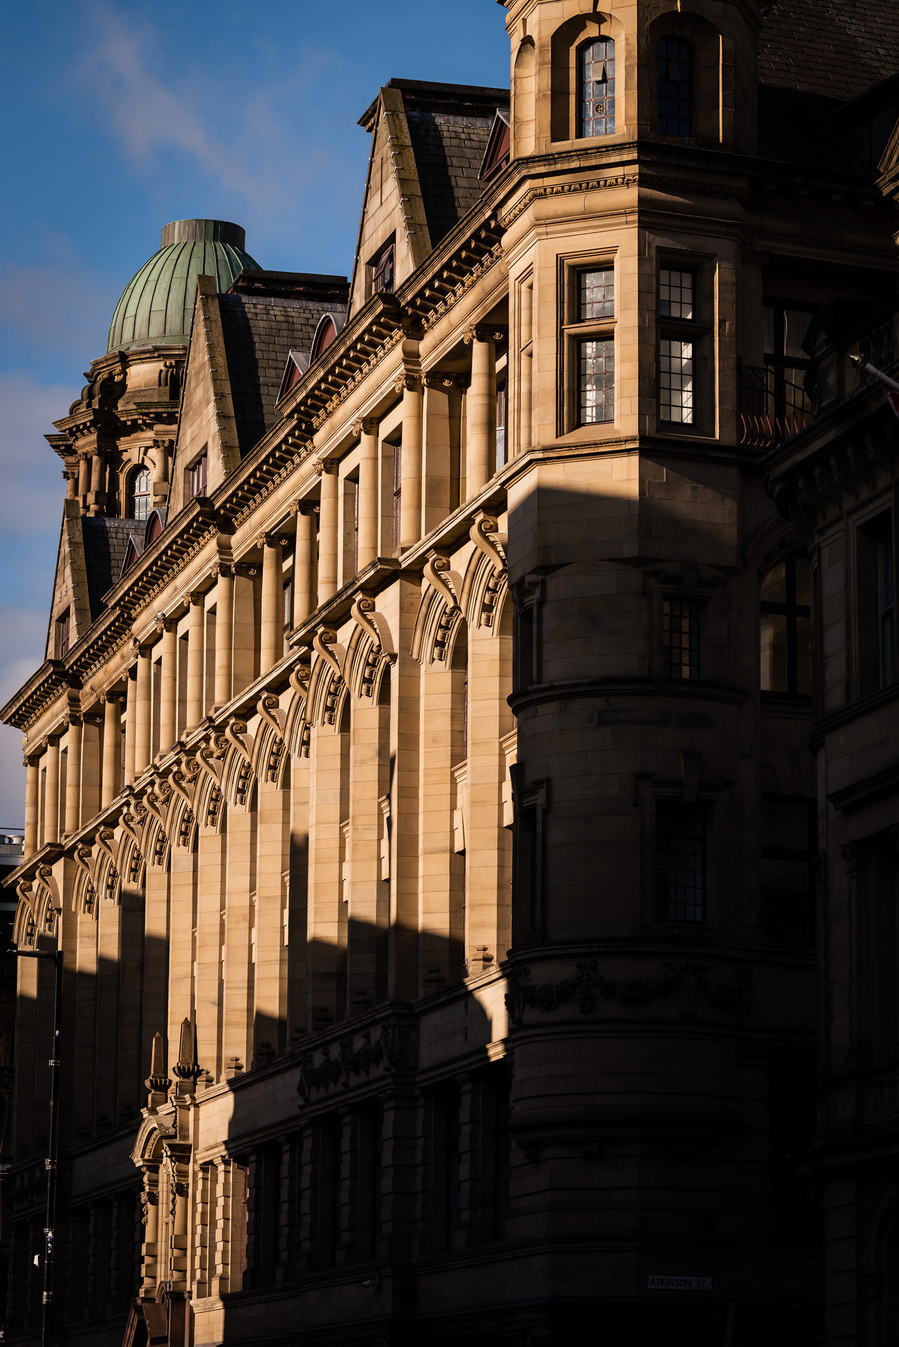 manchester city architecture building shows frontage of period property with shadows